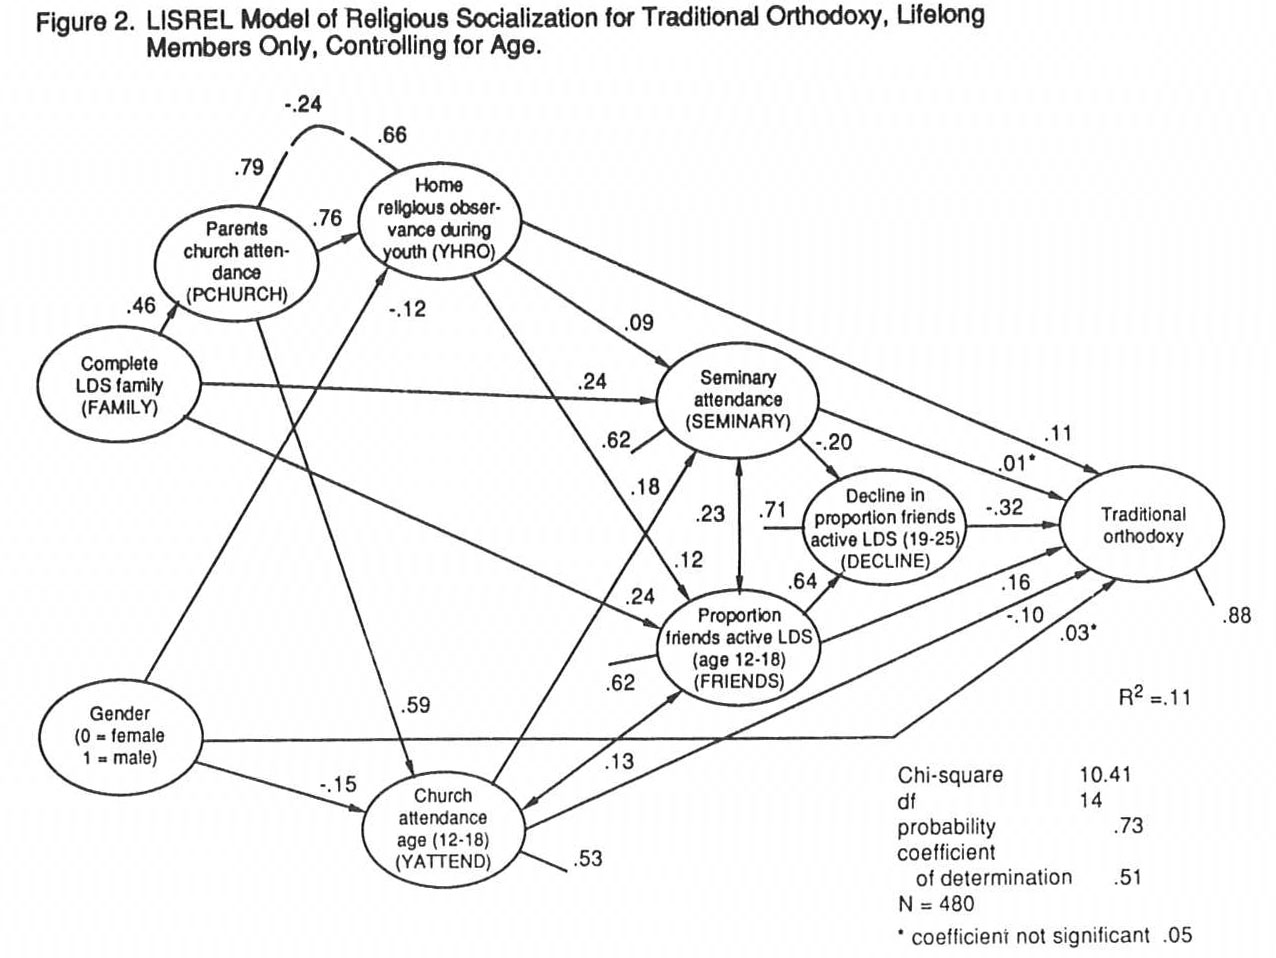 Model of Religious Socialization for Lifelong Members of Traditional Orthodoxy, Controlled for Age